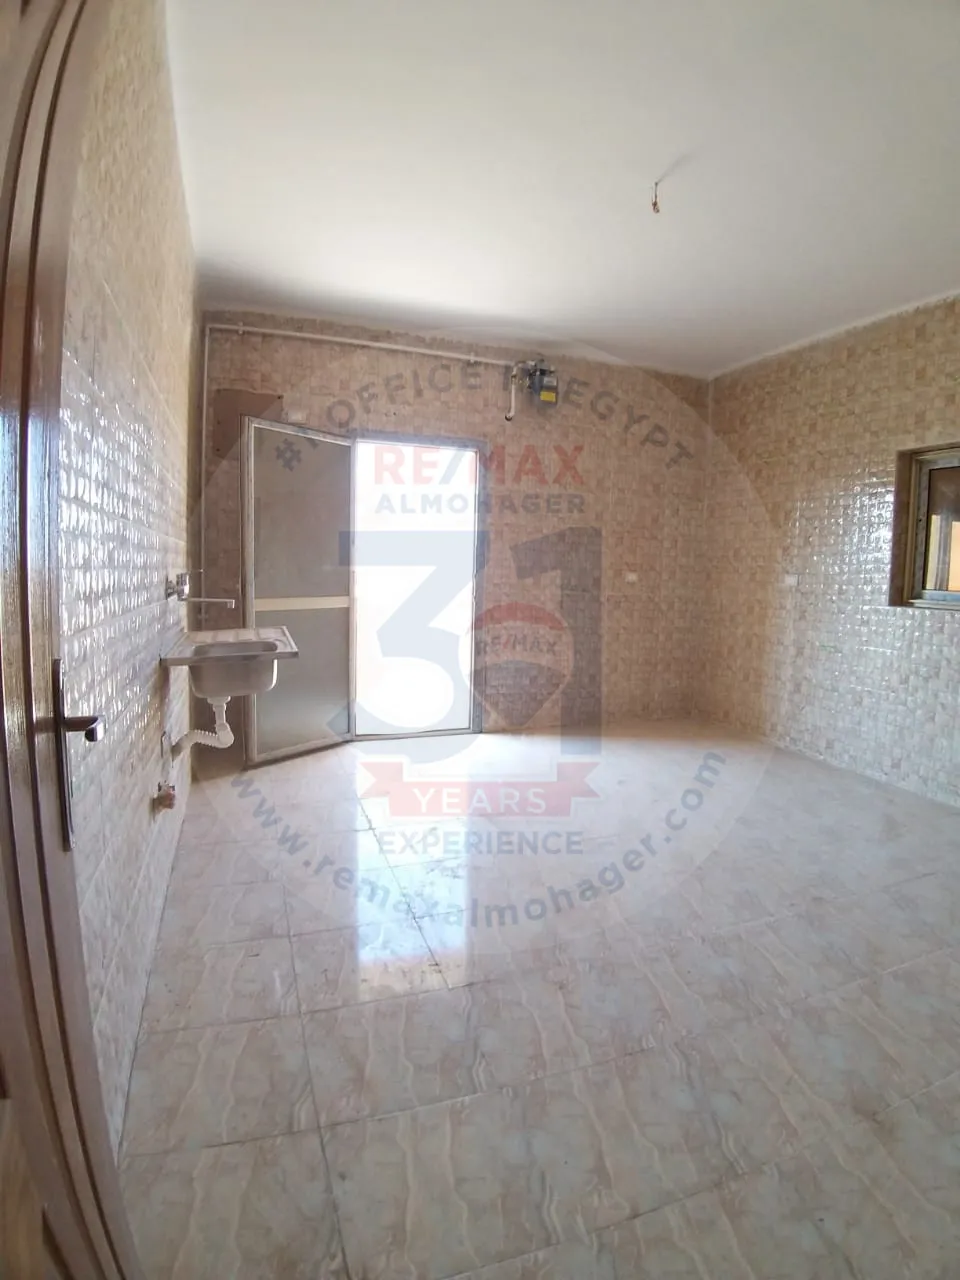 Real estate for rent in Shorouk City, 270 square meters